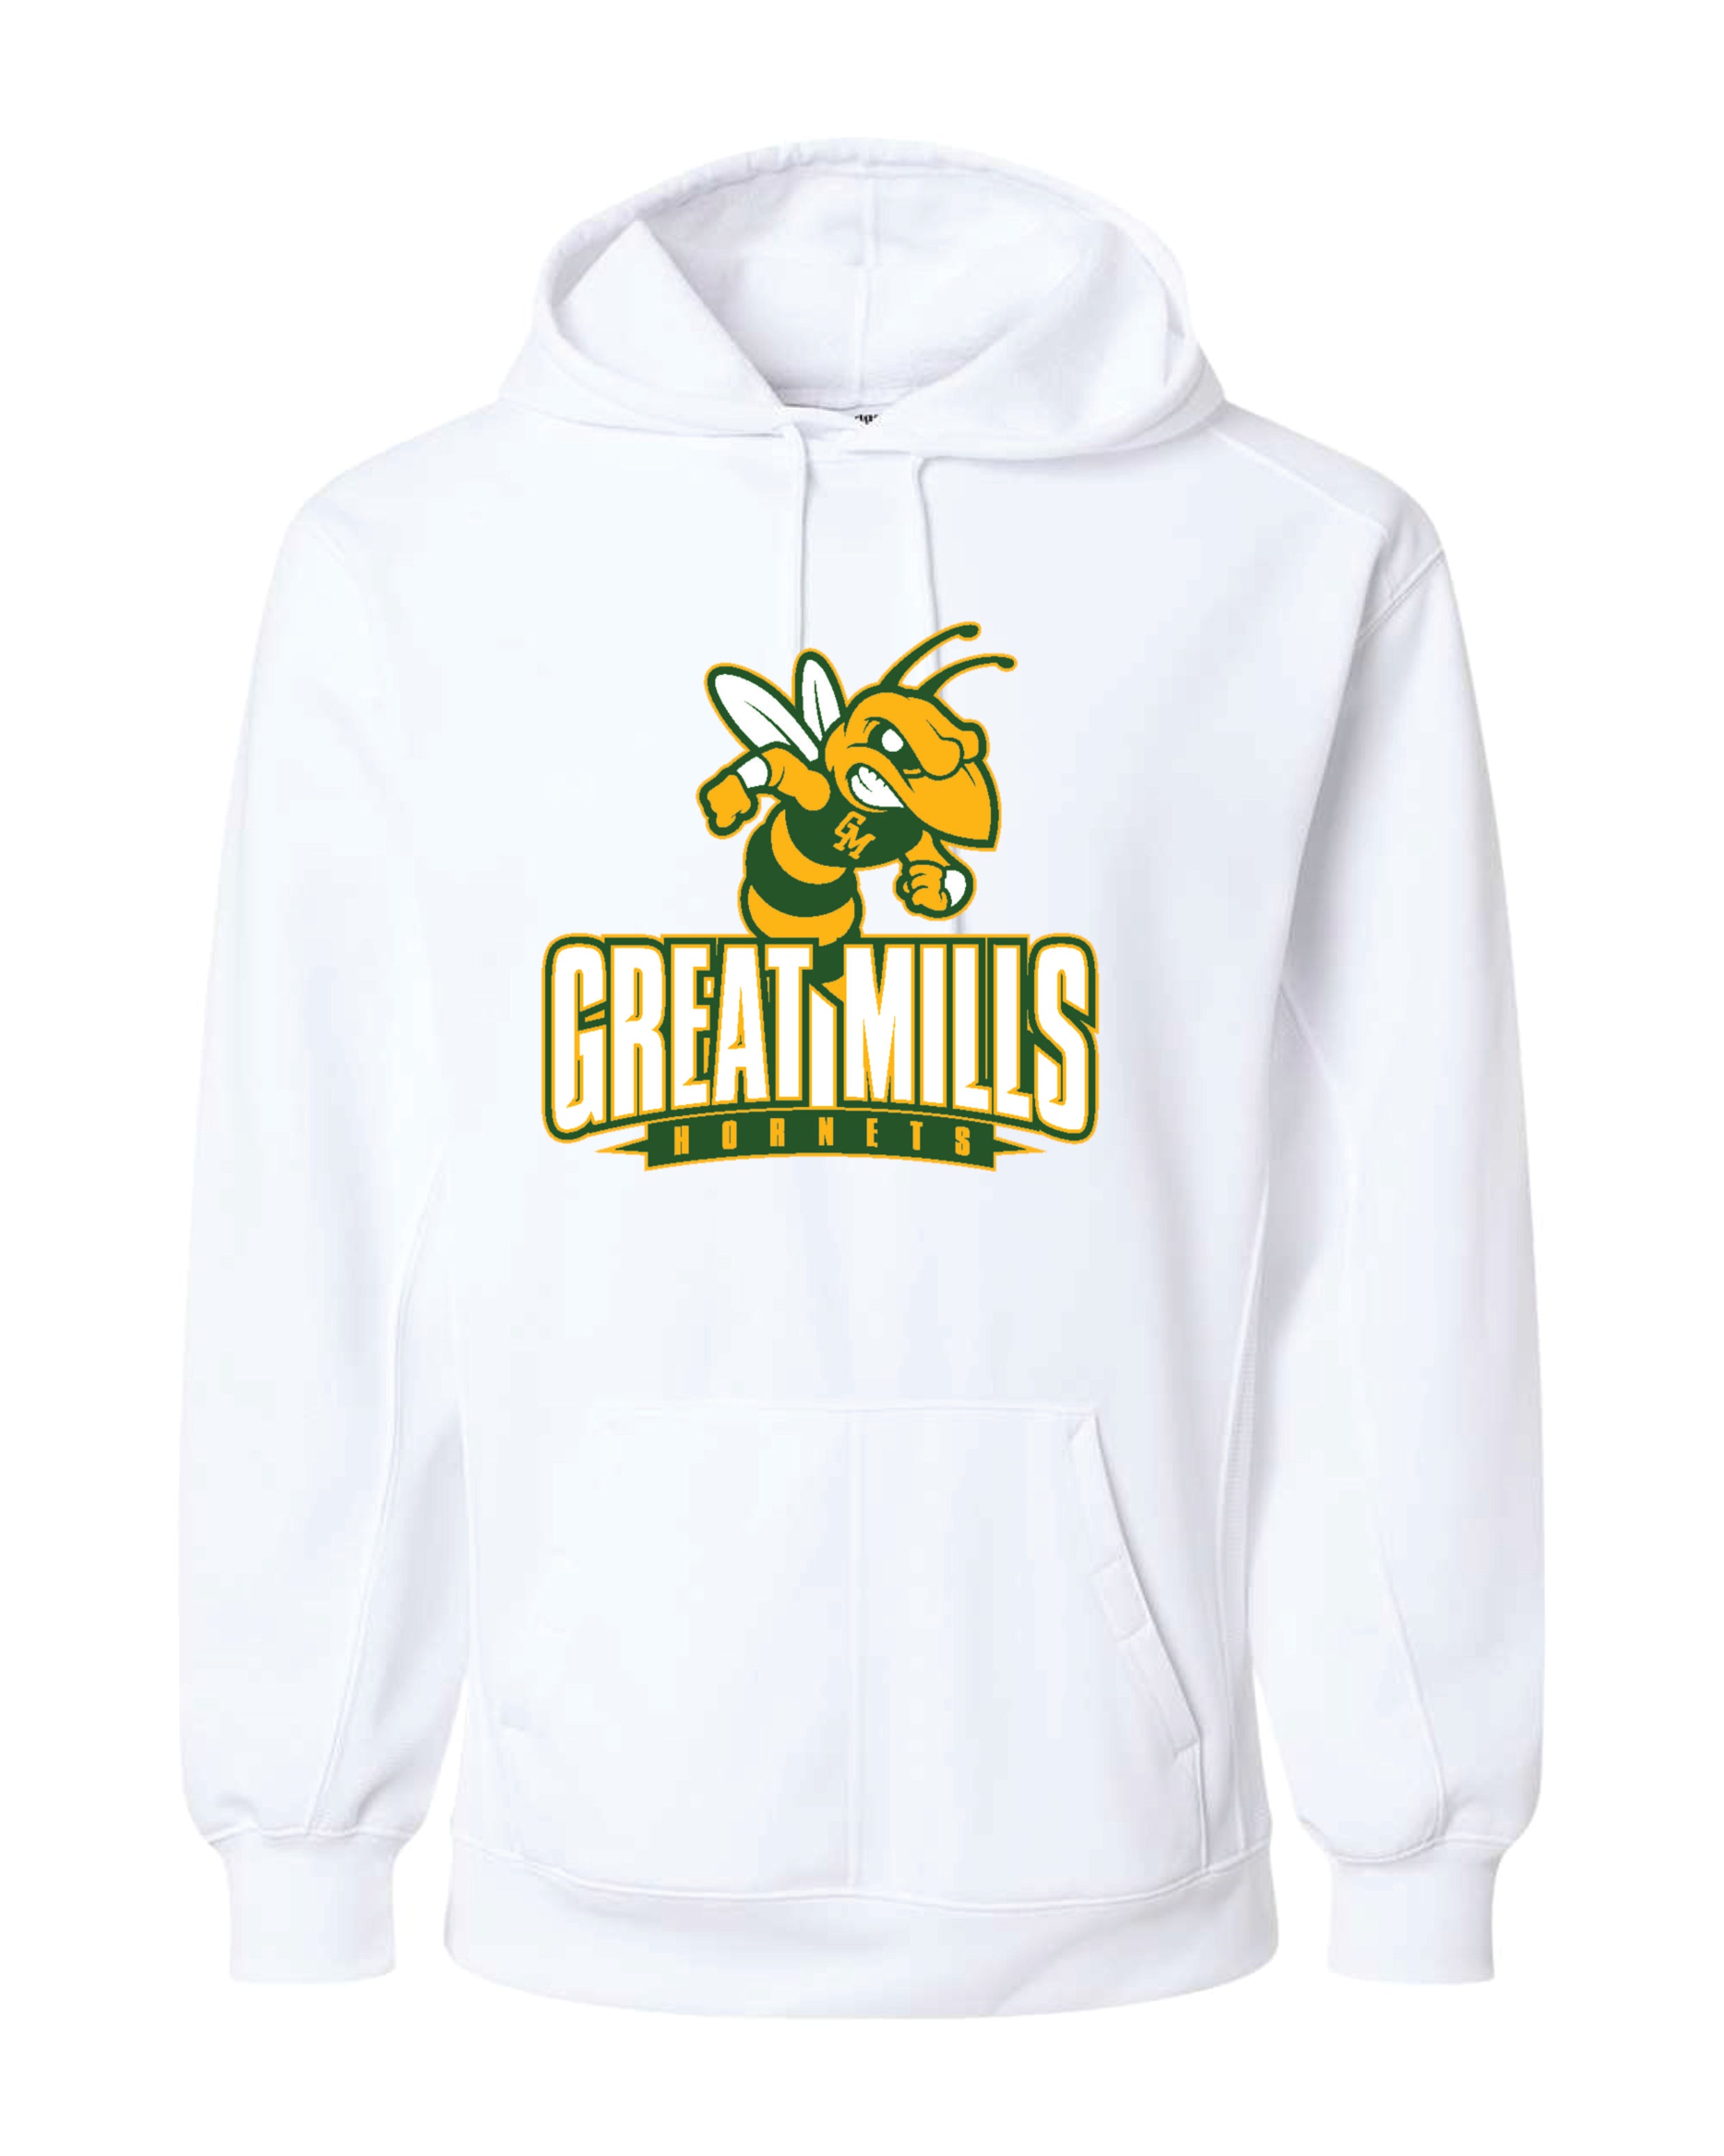 Great Mills Football Badger Dri-fit Hoodie - YOUTH